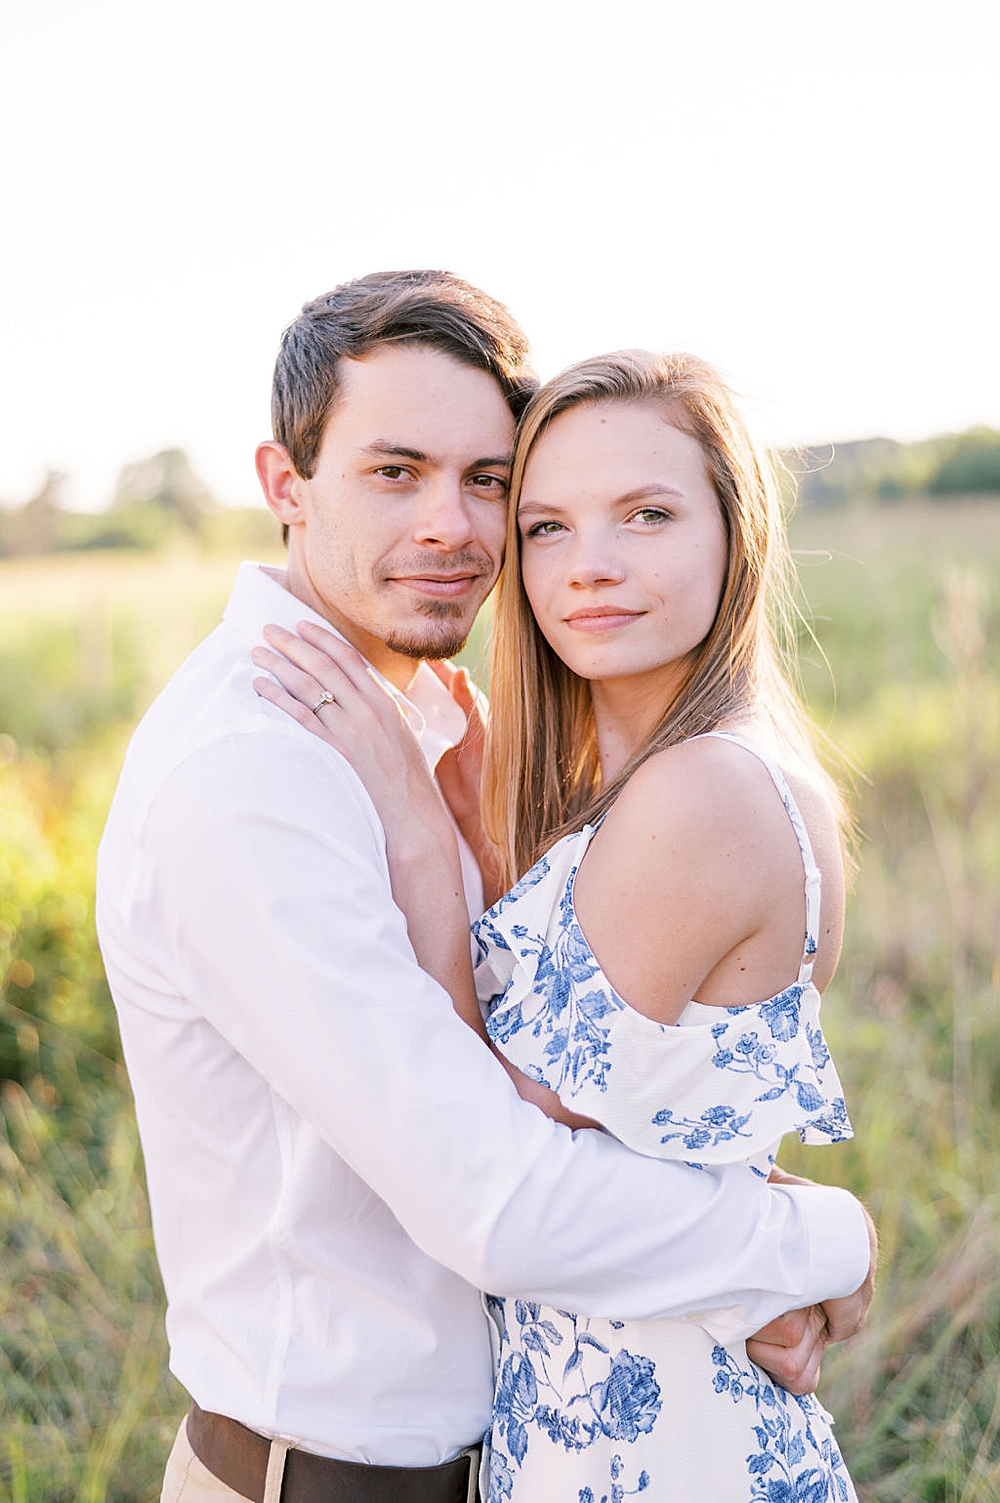 Romantic Summer Engagement in a Field